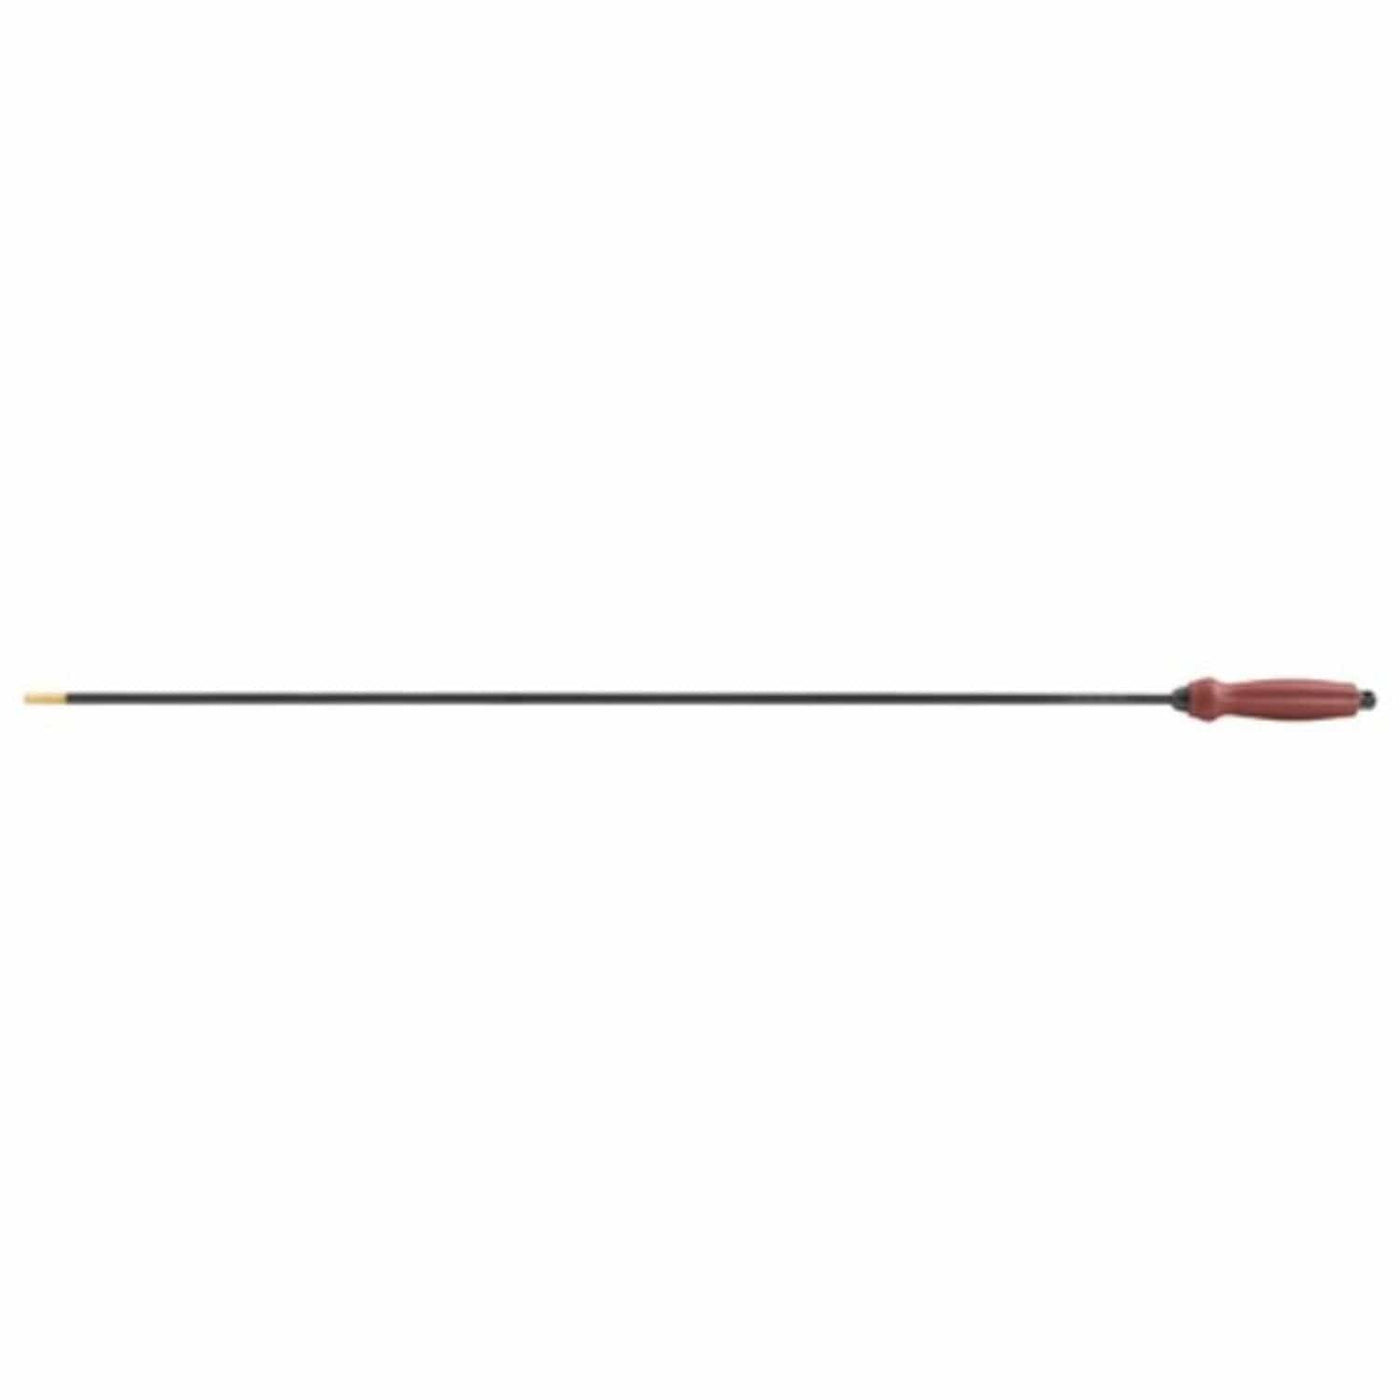 Tipton Tipton Deluxe 1 Pc CF Cleaning Rod 22 to 26 Cal 36 in Shooting